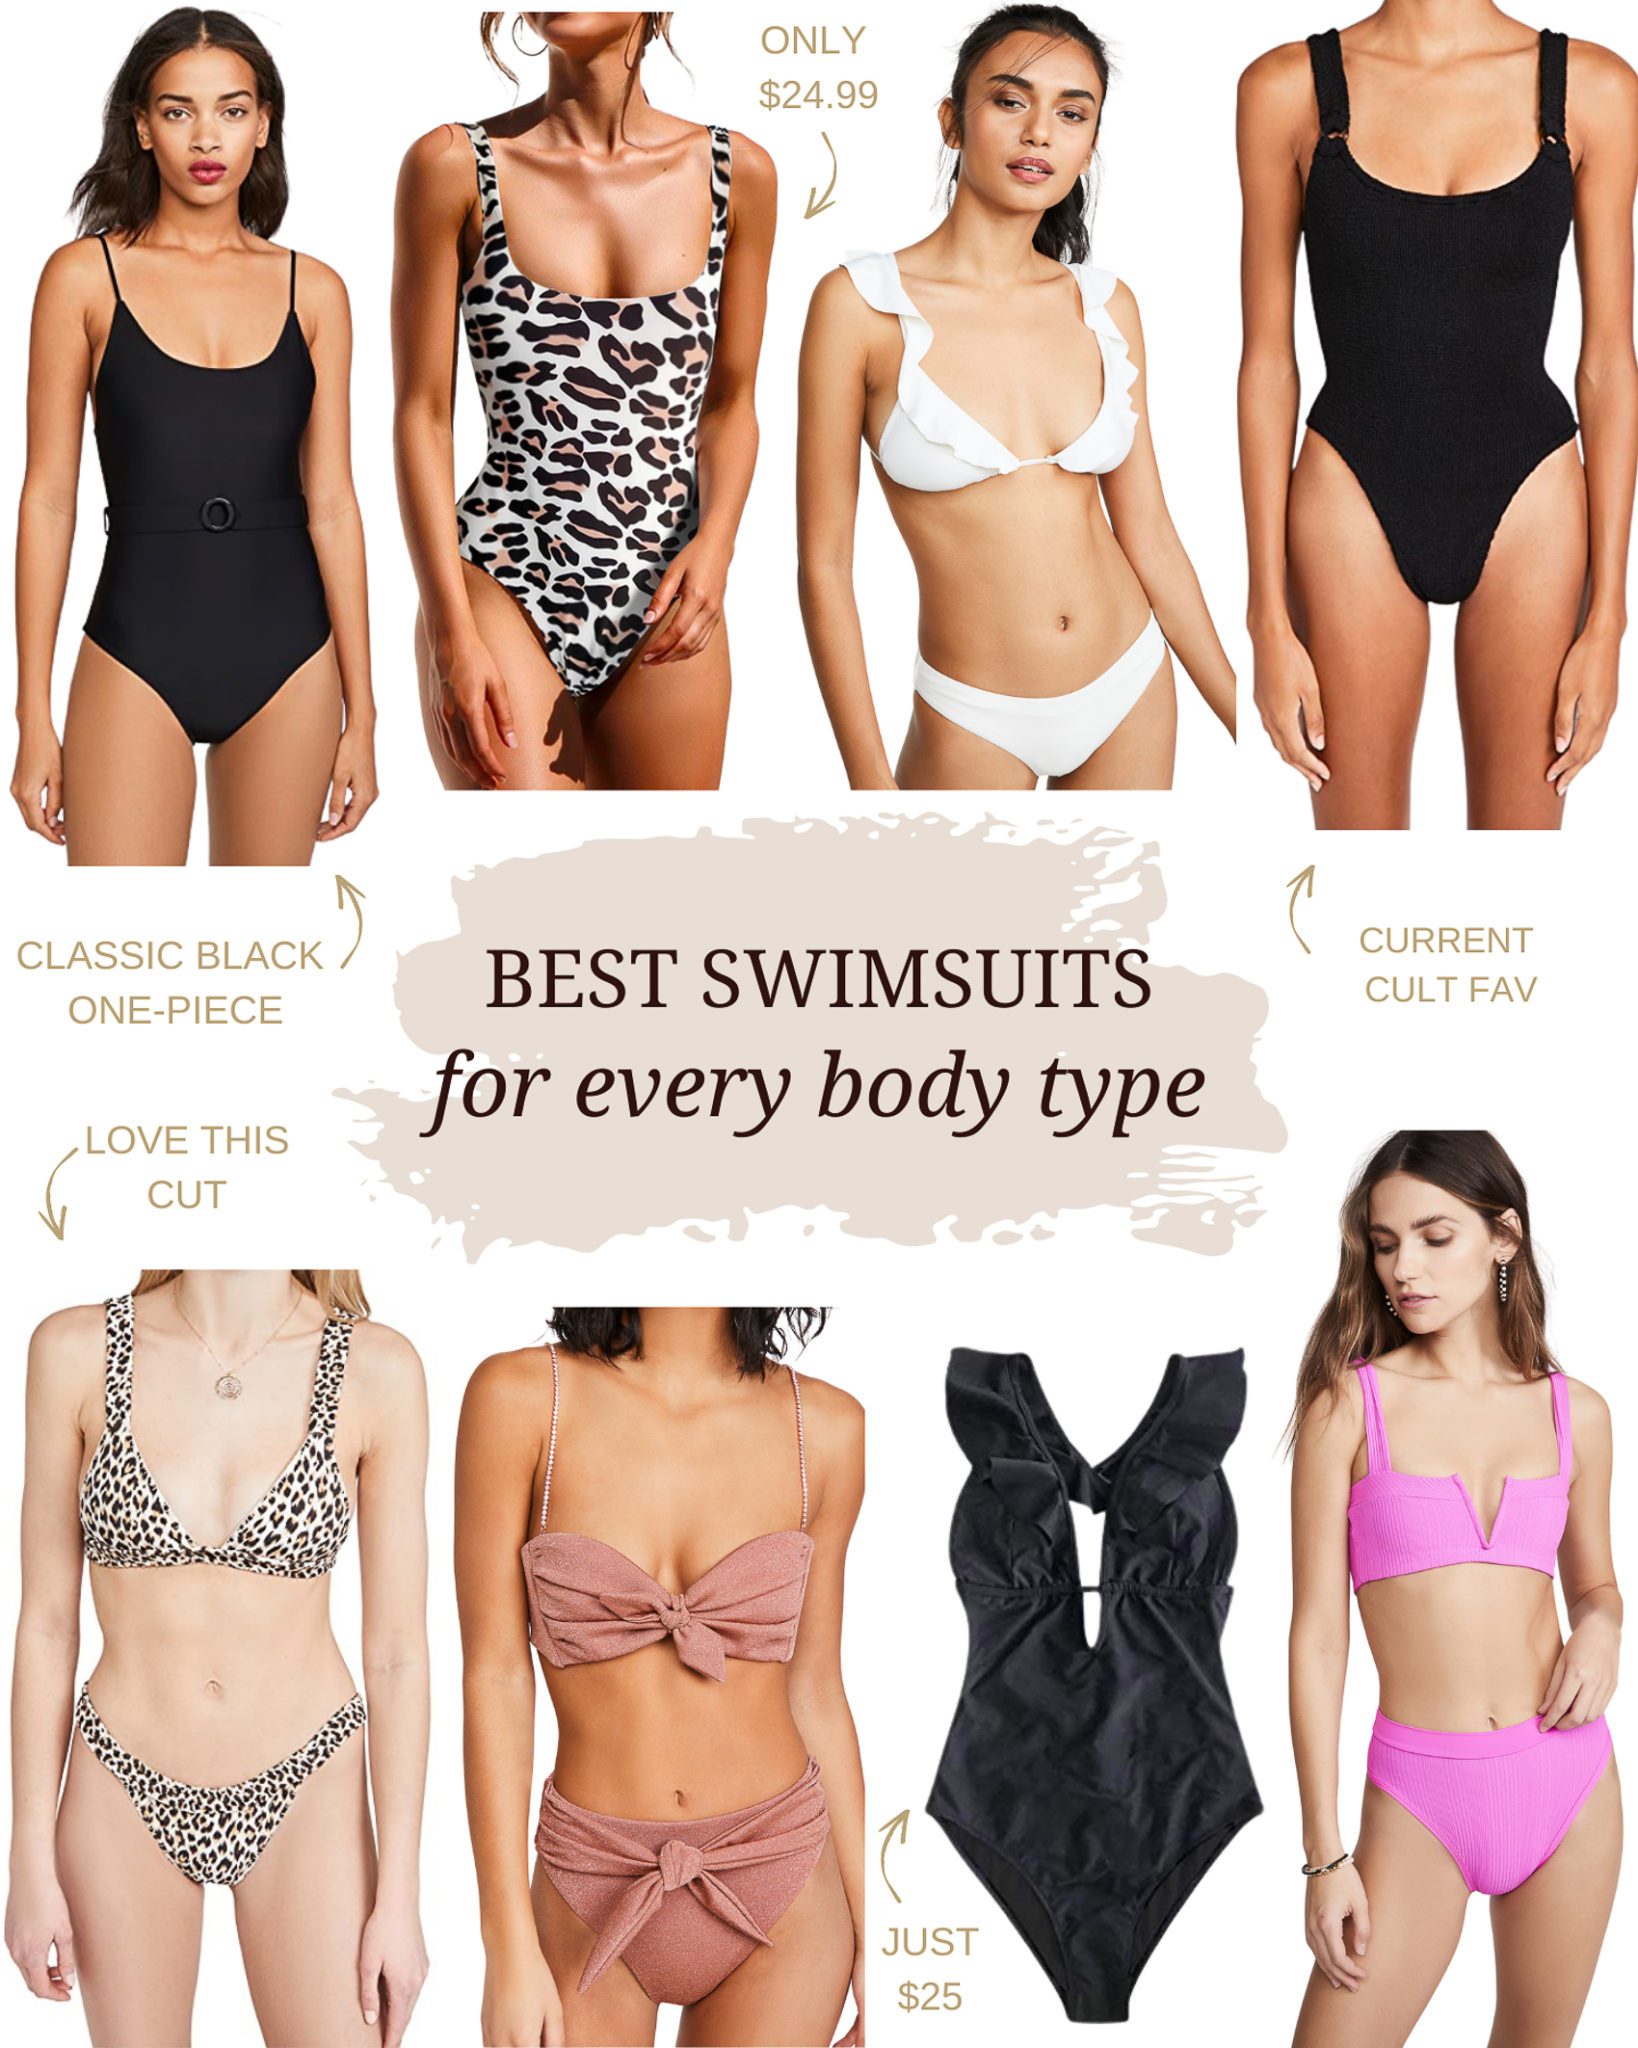 The Swimsuit Shopping Guide: 3 Tips for Every Body Type